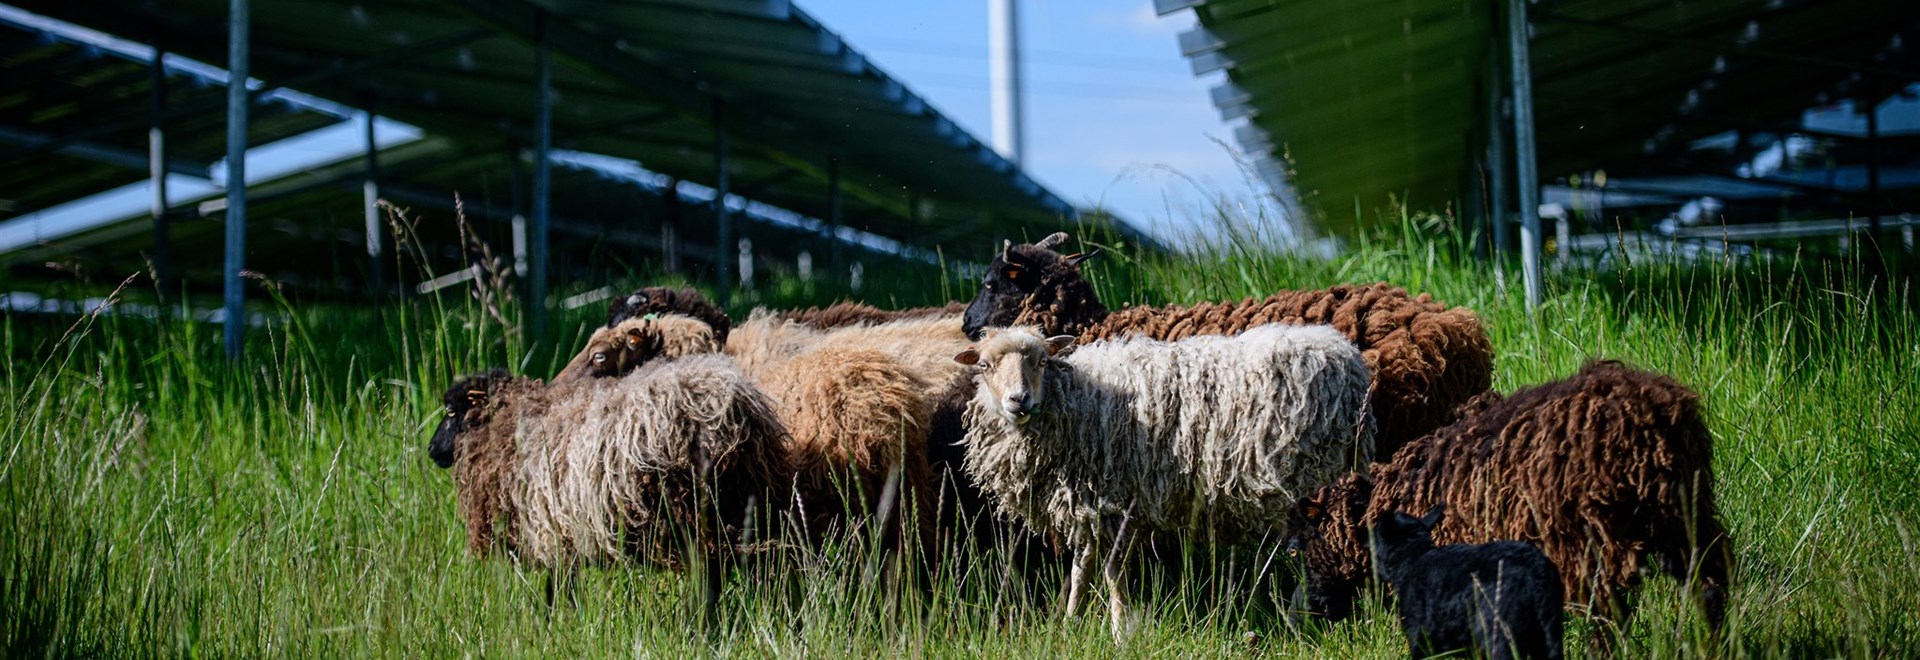 Sheep roaming between the solar panels at LCL in Gembloux